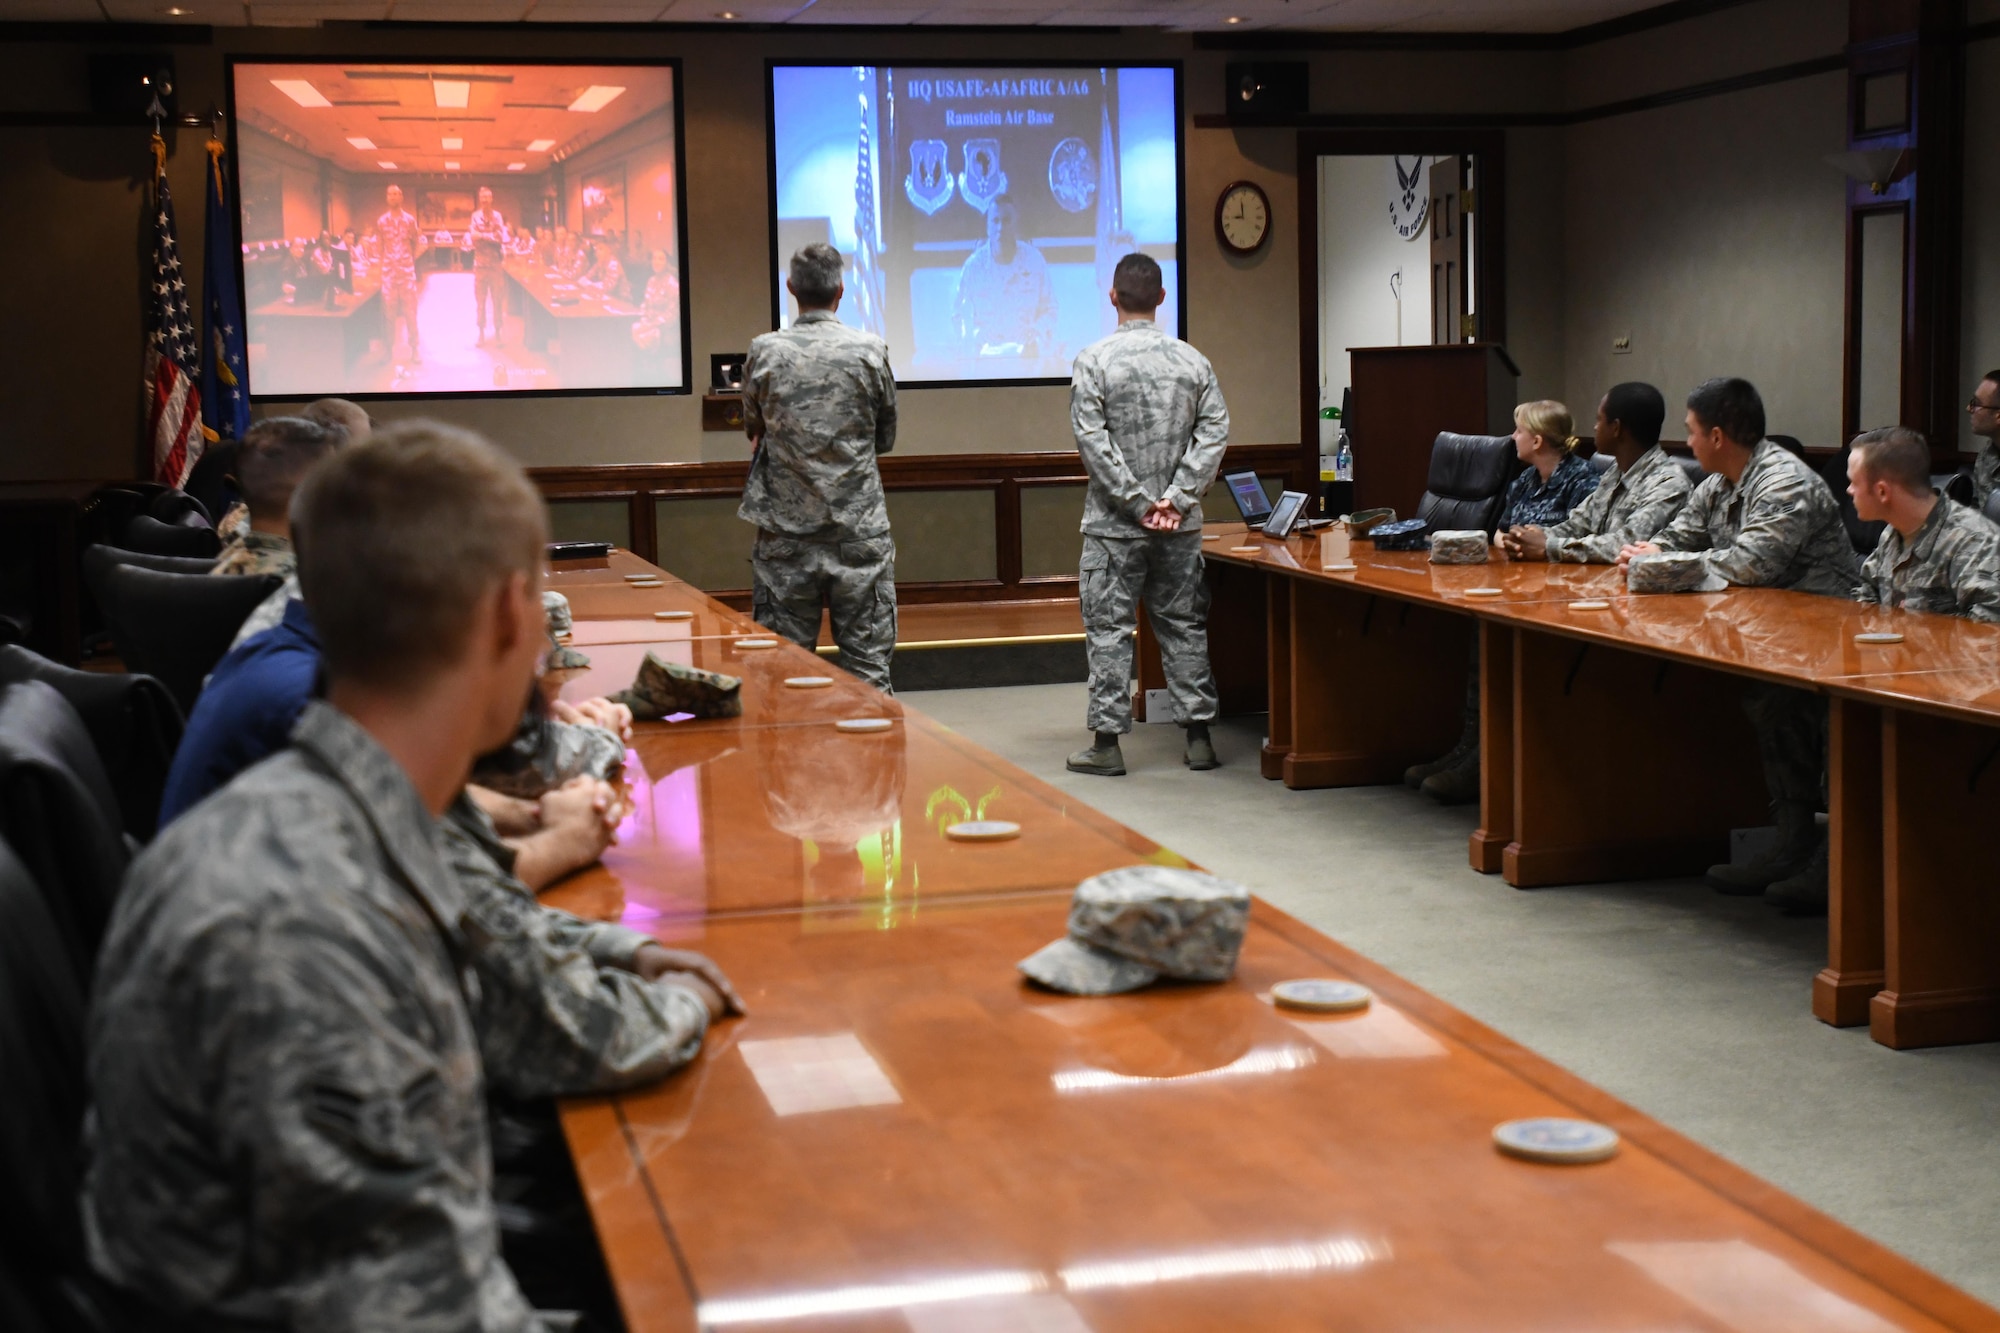 Lt. Gen. Richard Clark, 3rd Air Force commander, Ramstein Air Base, Germany, delivers remarks during a video teleconference with members of the 335th Training Squadron at Stennis Hall Oct. 12, 2017, on Keesler Air Force Base, Mississippi. Clark received a mission and regional weather forecast from 335th TRS weather students as a training demonstration as well as a mentorship opportunity. (U.S. Air Force photo by Kemberly Groue)